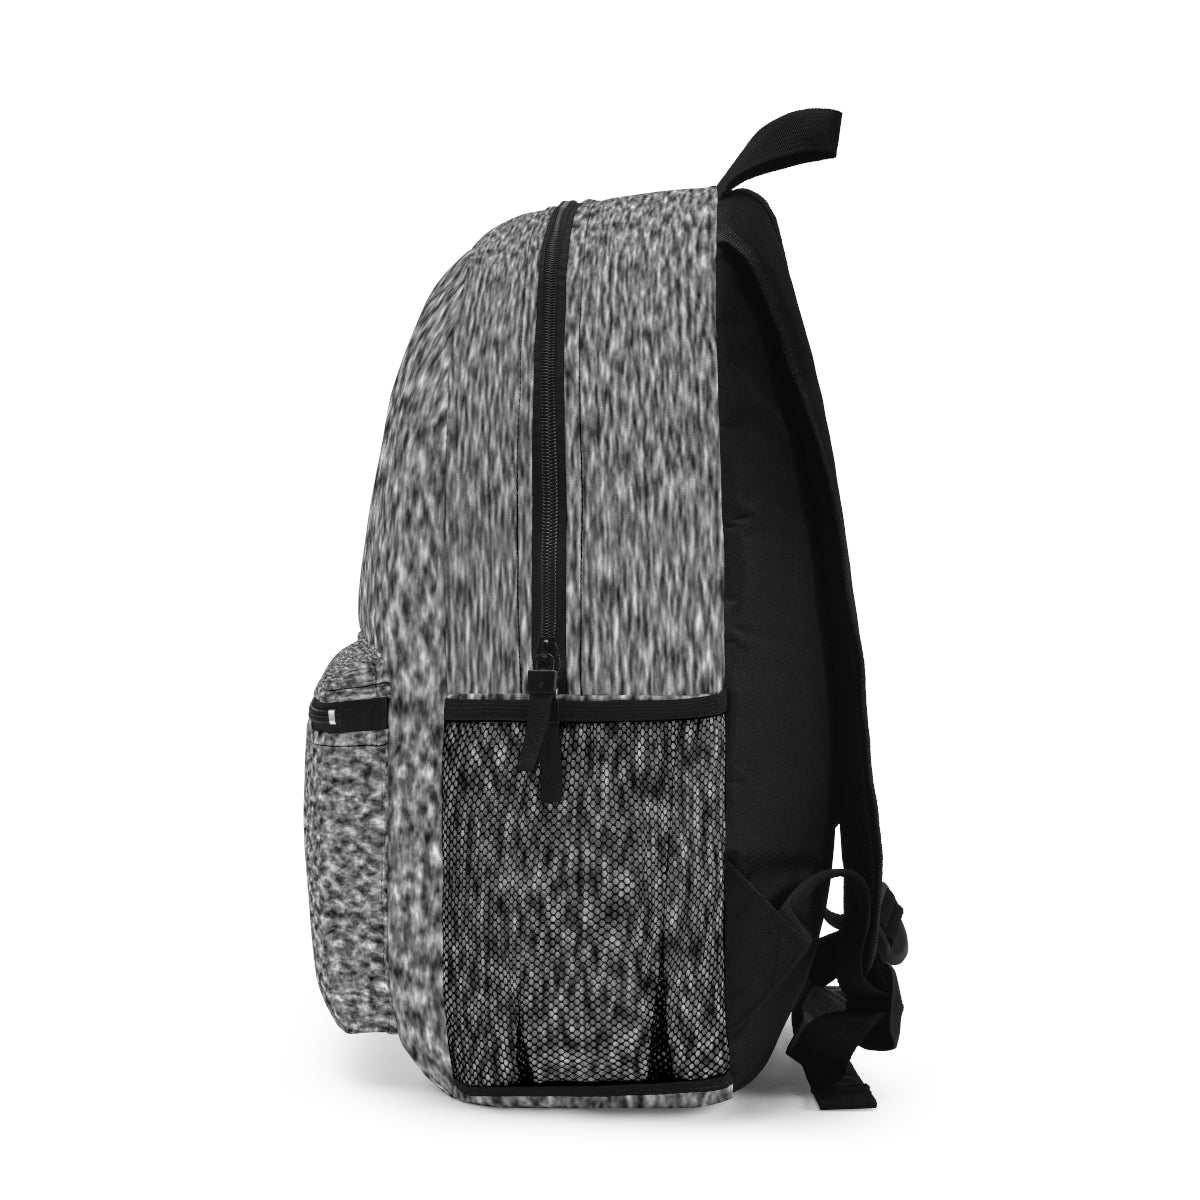 White and Black Clouds Backpack